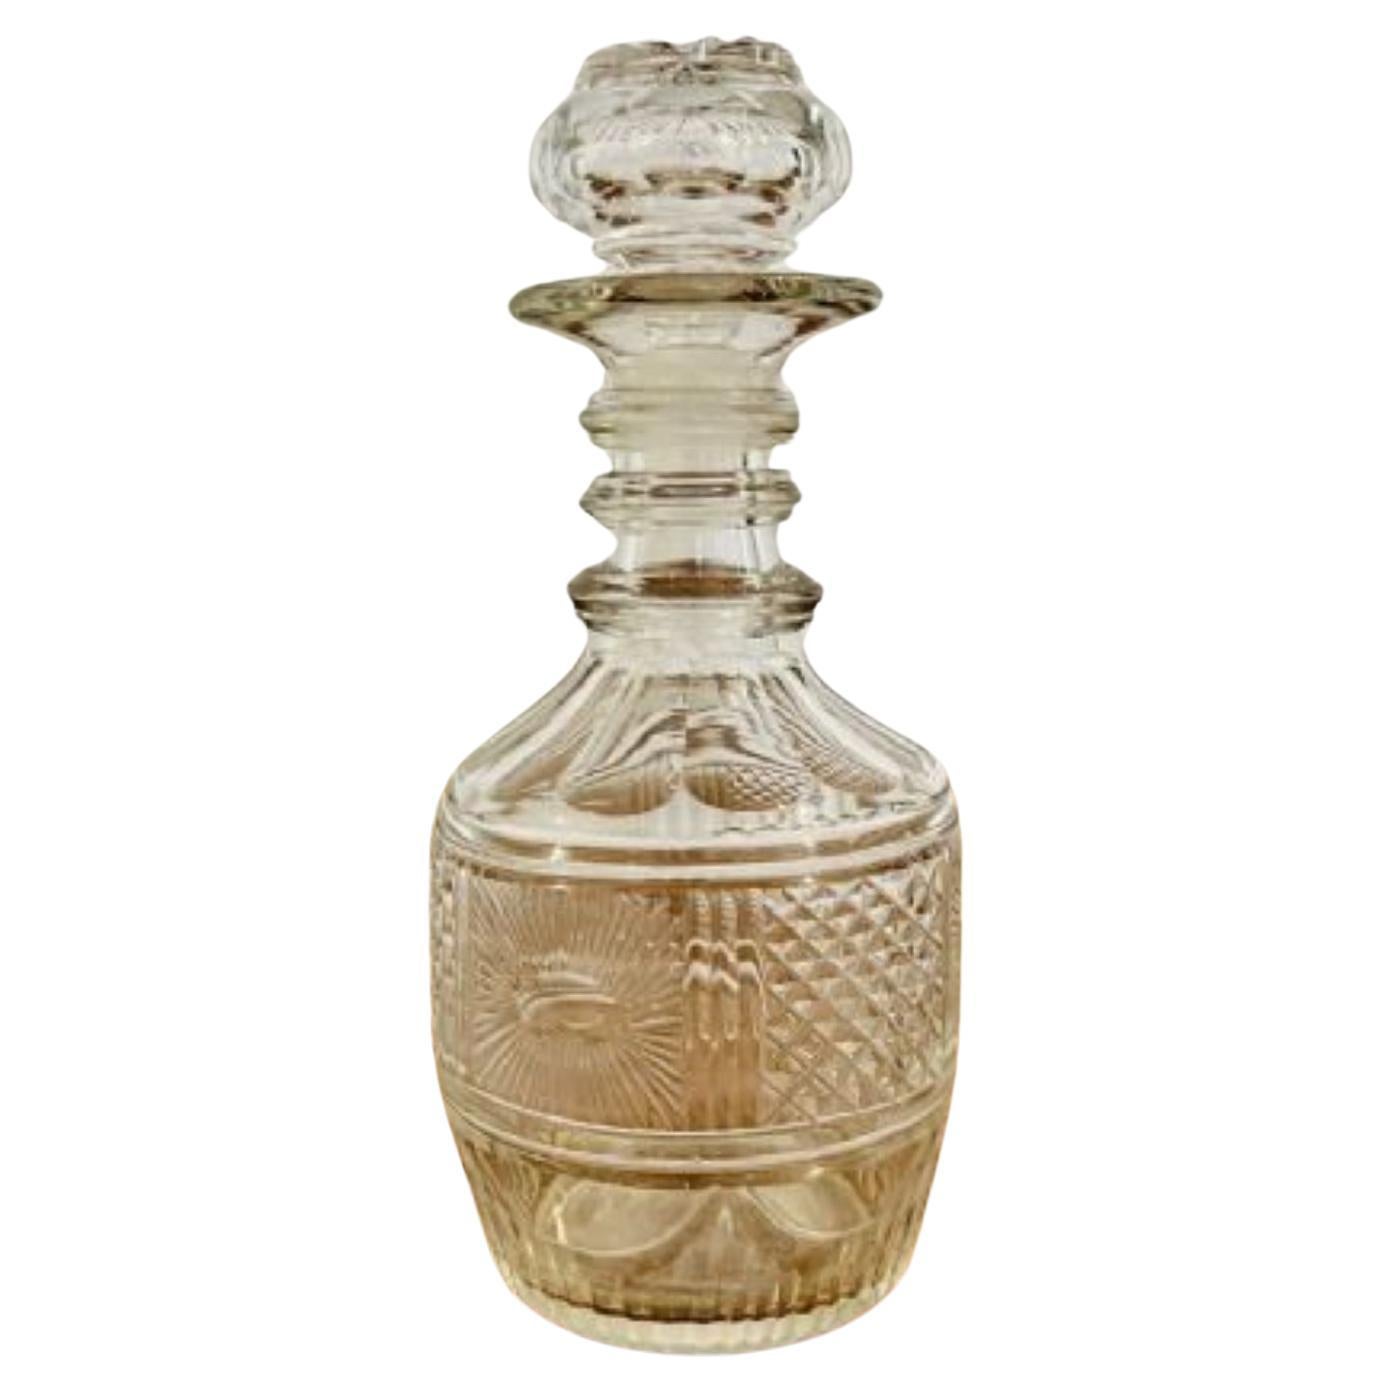 Quality antique George III cut glass decanter For Sale